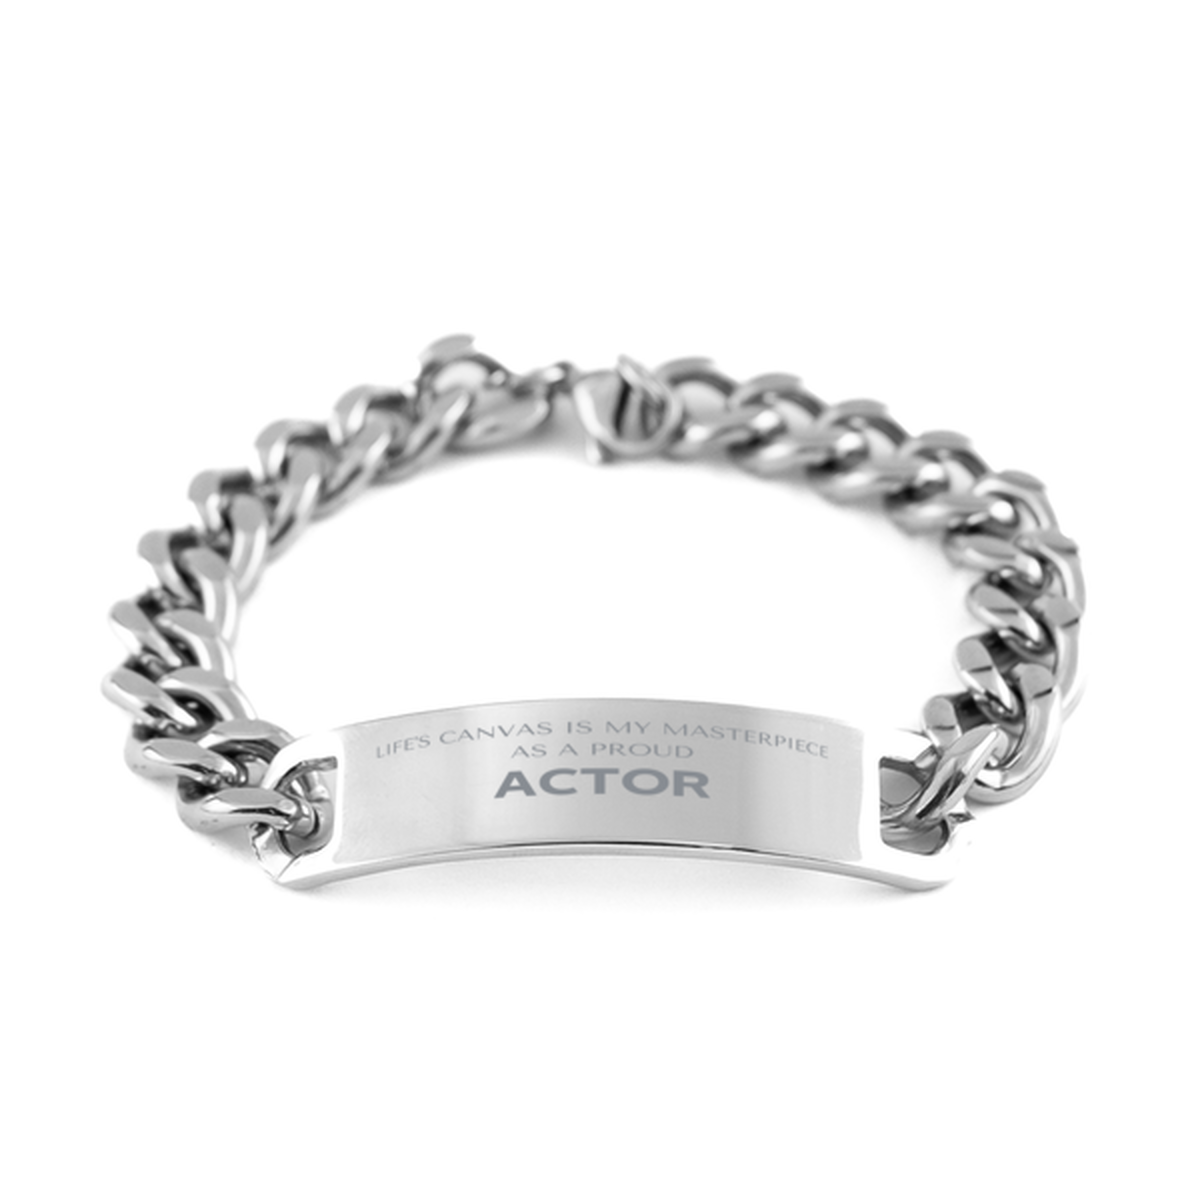 Proud Actor Gifts, Life's canvas is my masterpiece, Epic Birthday Christmas Unique Cuban Chain Stainless Steel Bracelet For Actor, Coworkers, Men, Women, Friends